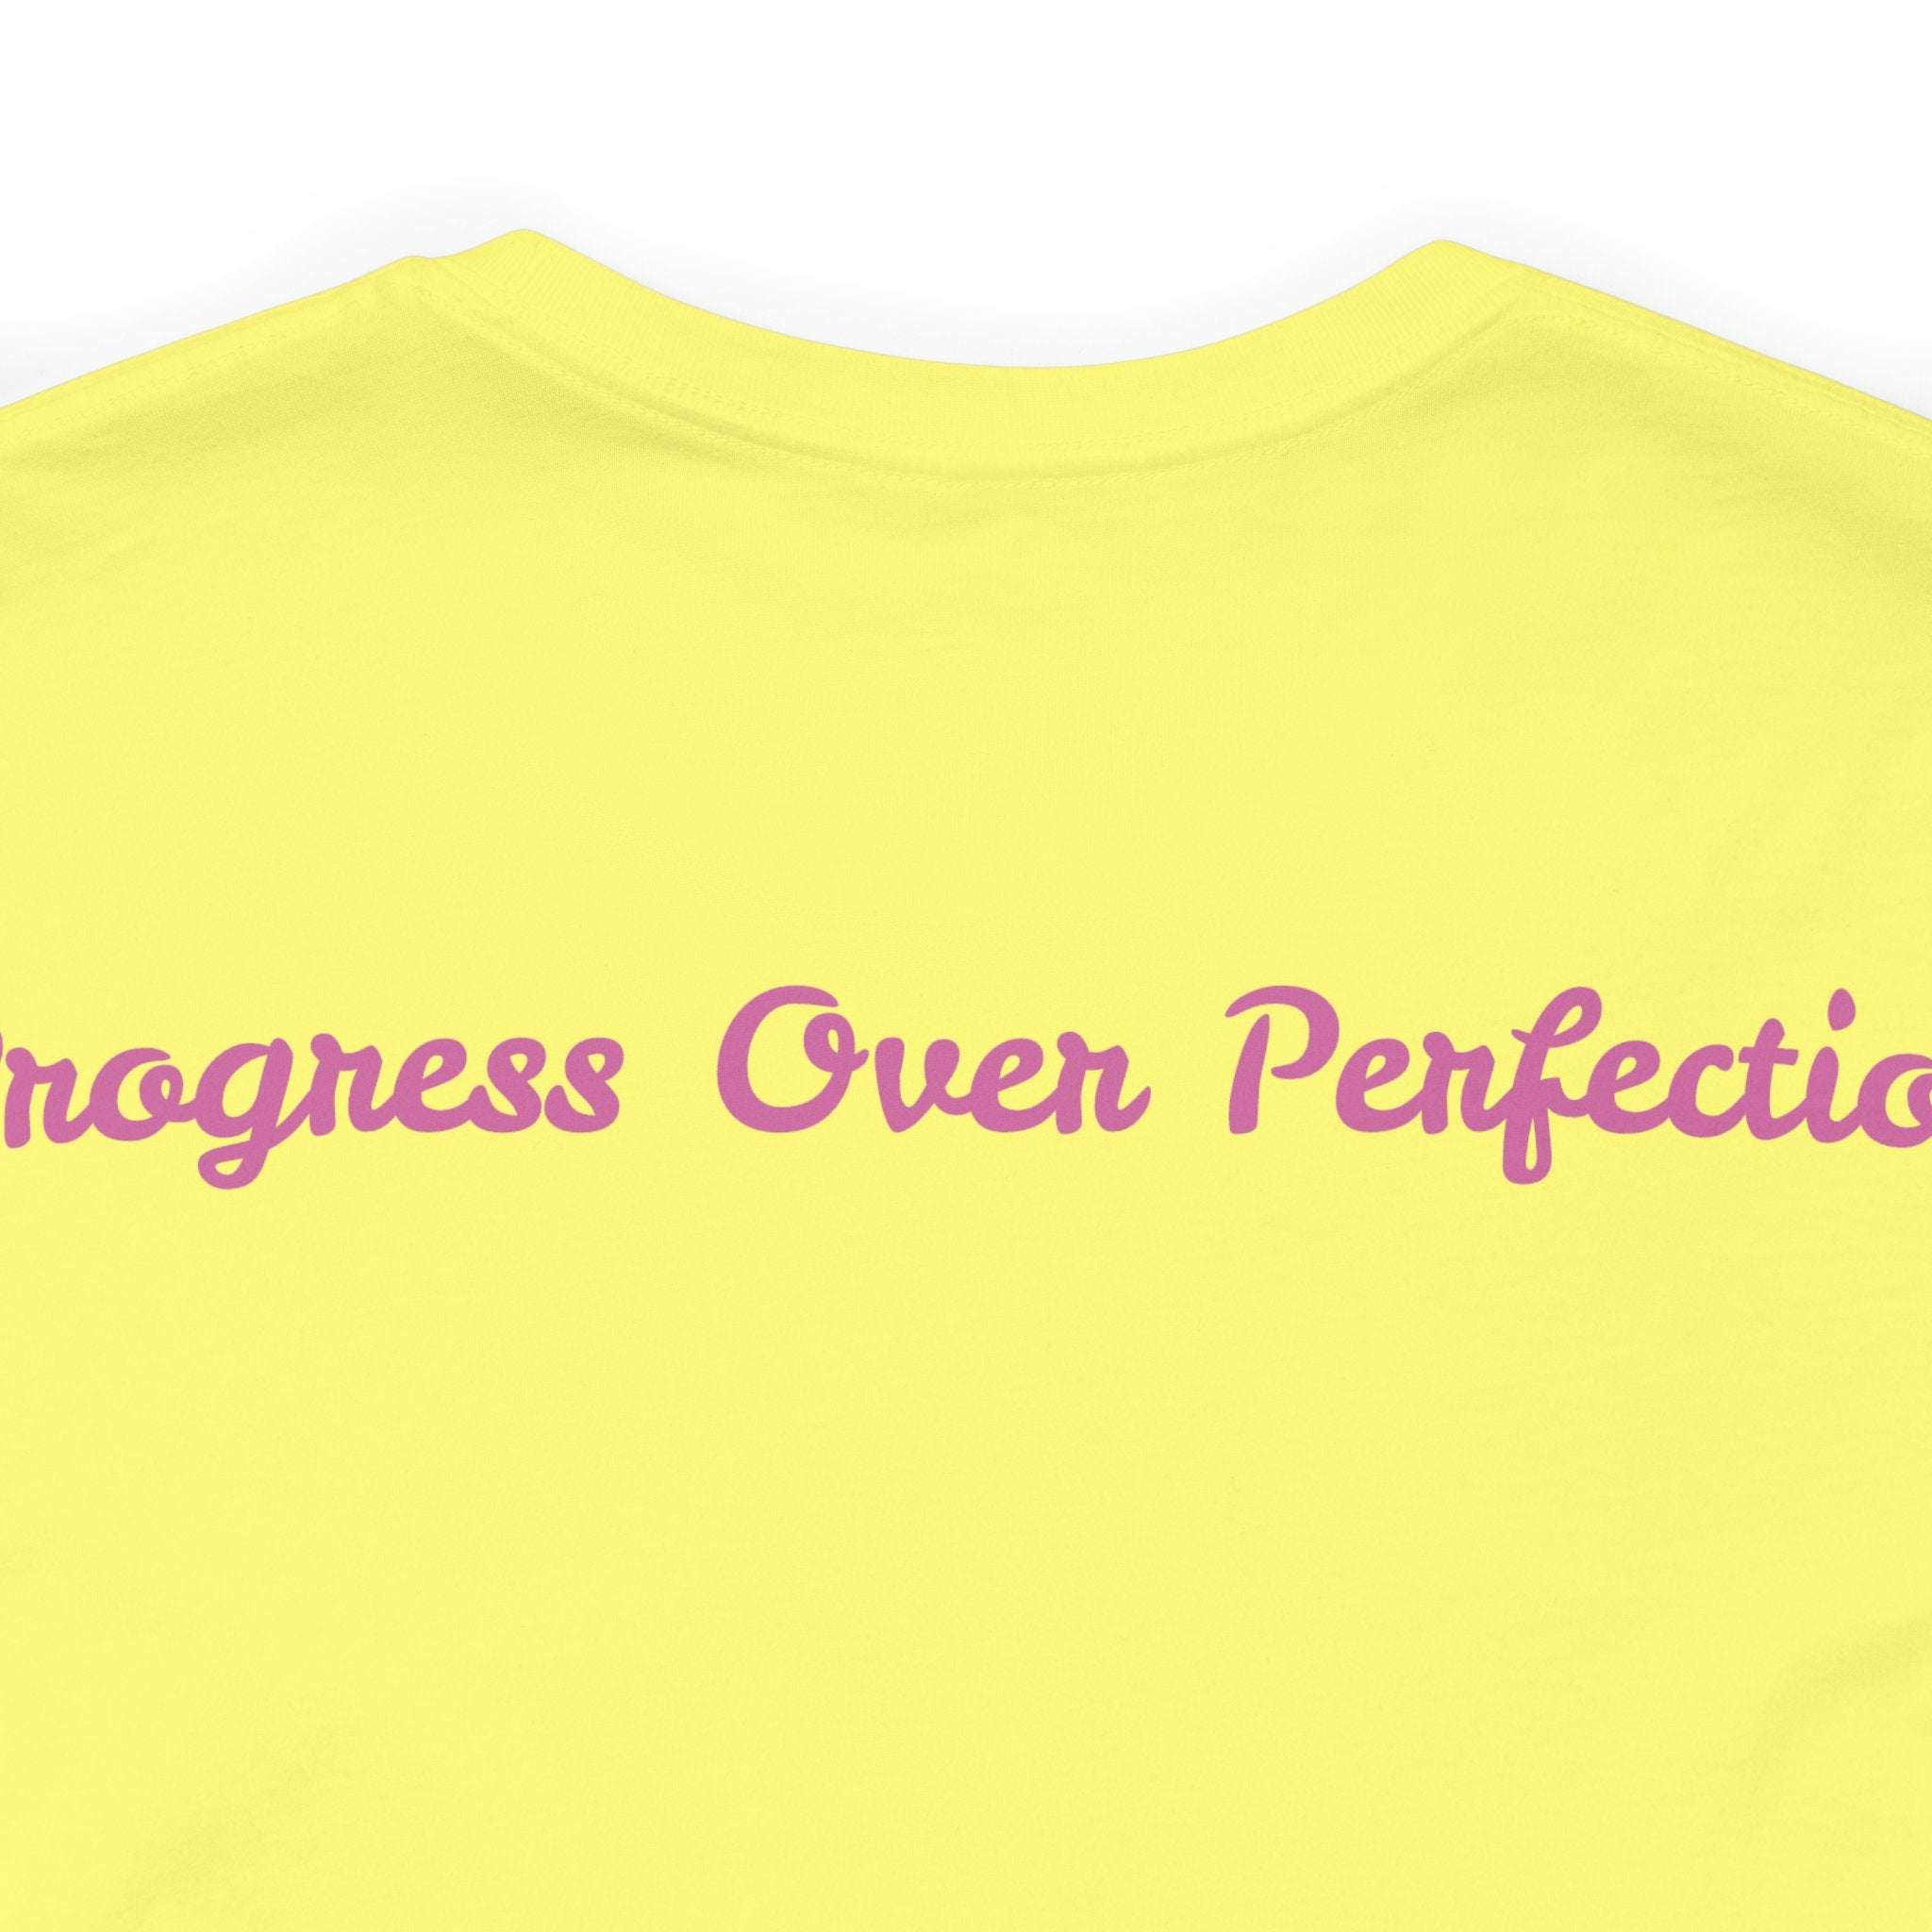 Progress Over Perfection Tee - Bella+Canvas 3001 Yellow Airlume Cotton Bella+Canvas 3001 Crew Neckline Jersey Short Sleeve Lightweight Fabric Mental Health Support Retail Fit Tear-away Label Tee Unisex Tee T-Shirt 17542791736810215359_2048 Printify